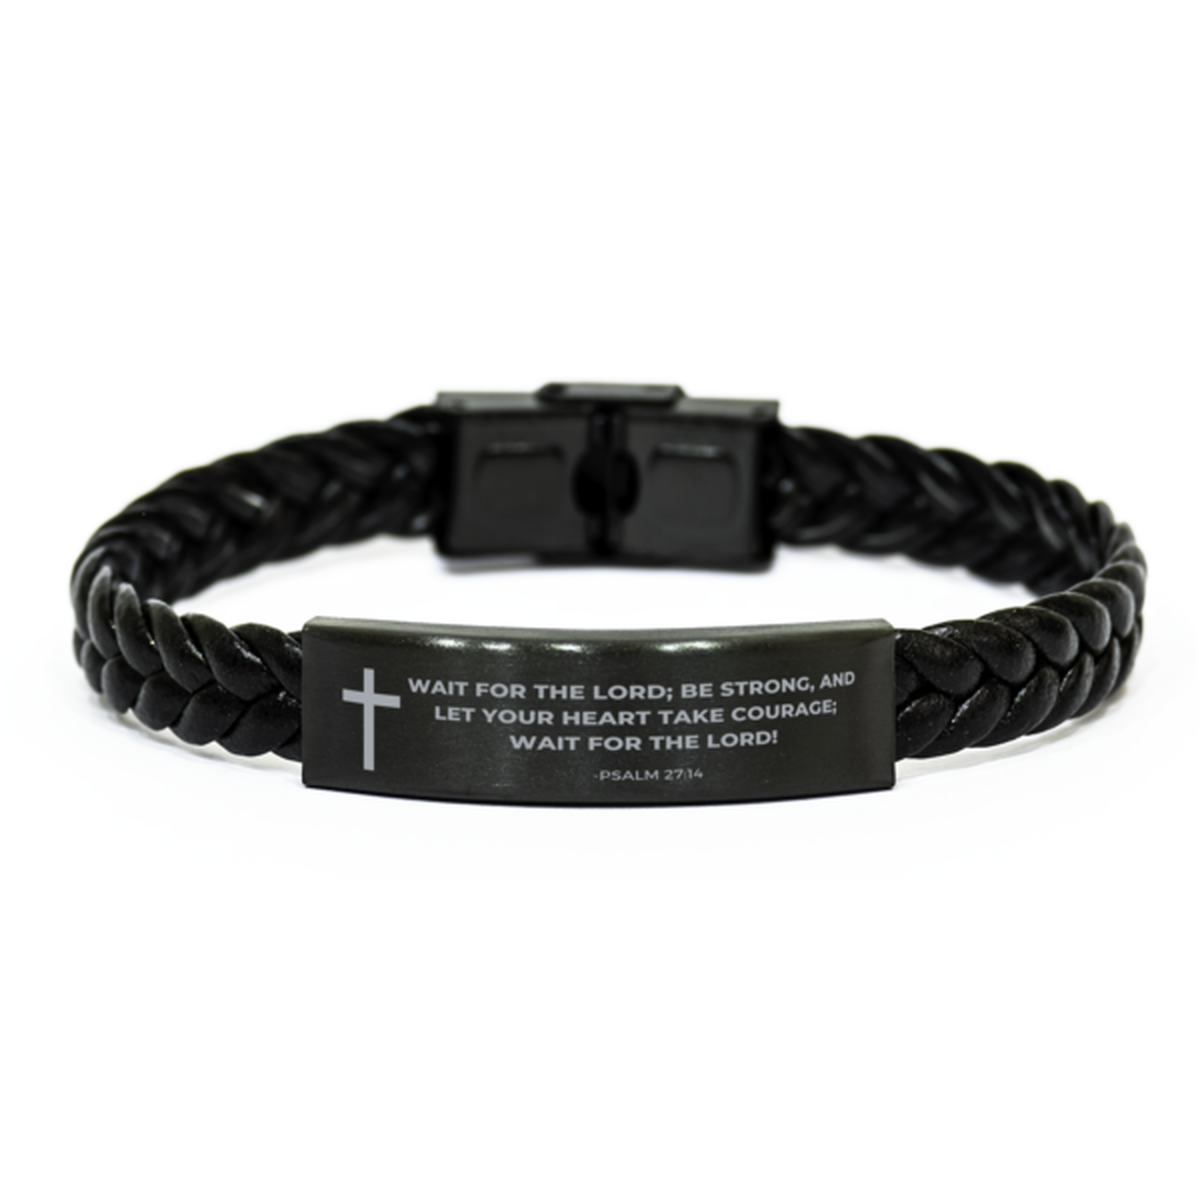 Baptism Gifts For Teenage Boys Girls, Christian Bible Verse Braided Leather Bracelet, Wait for the Lord, Catholic Confirmation Gifts for Son, Godson, Grandson, Nephew